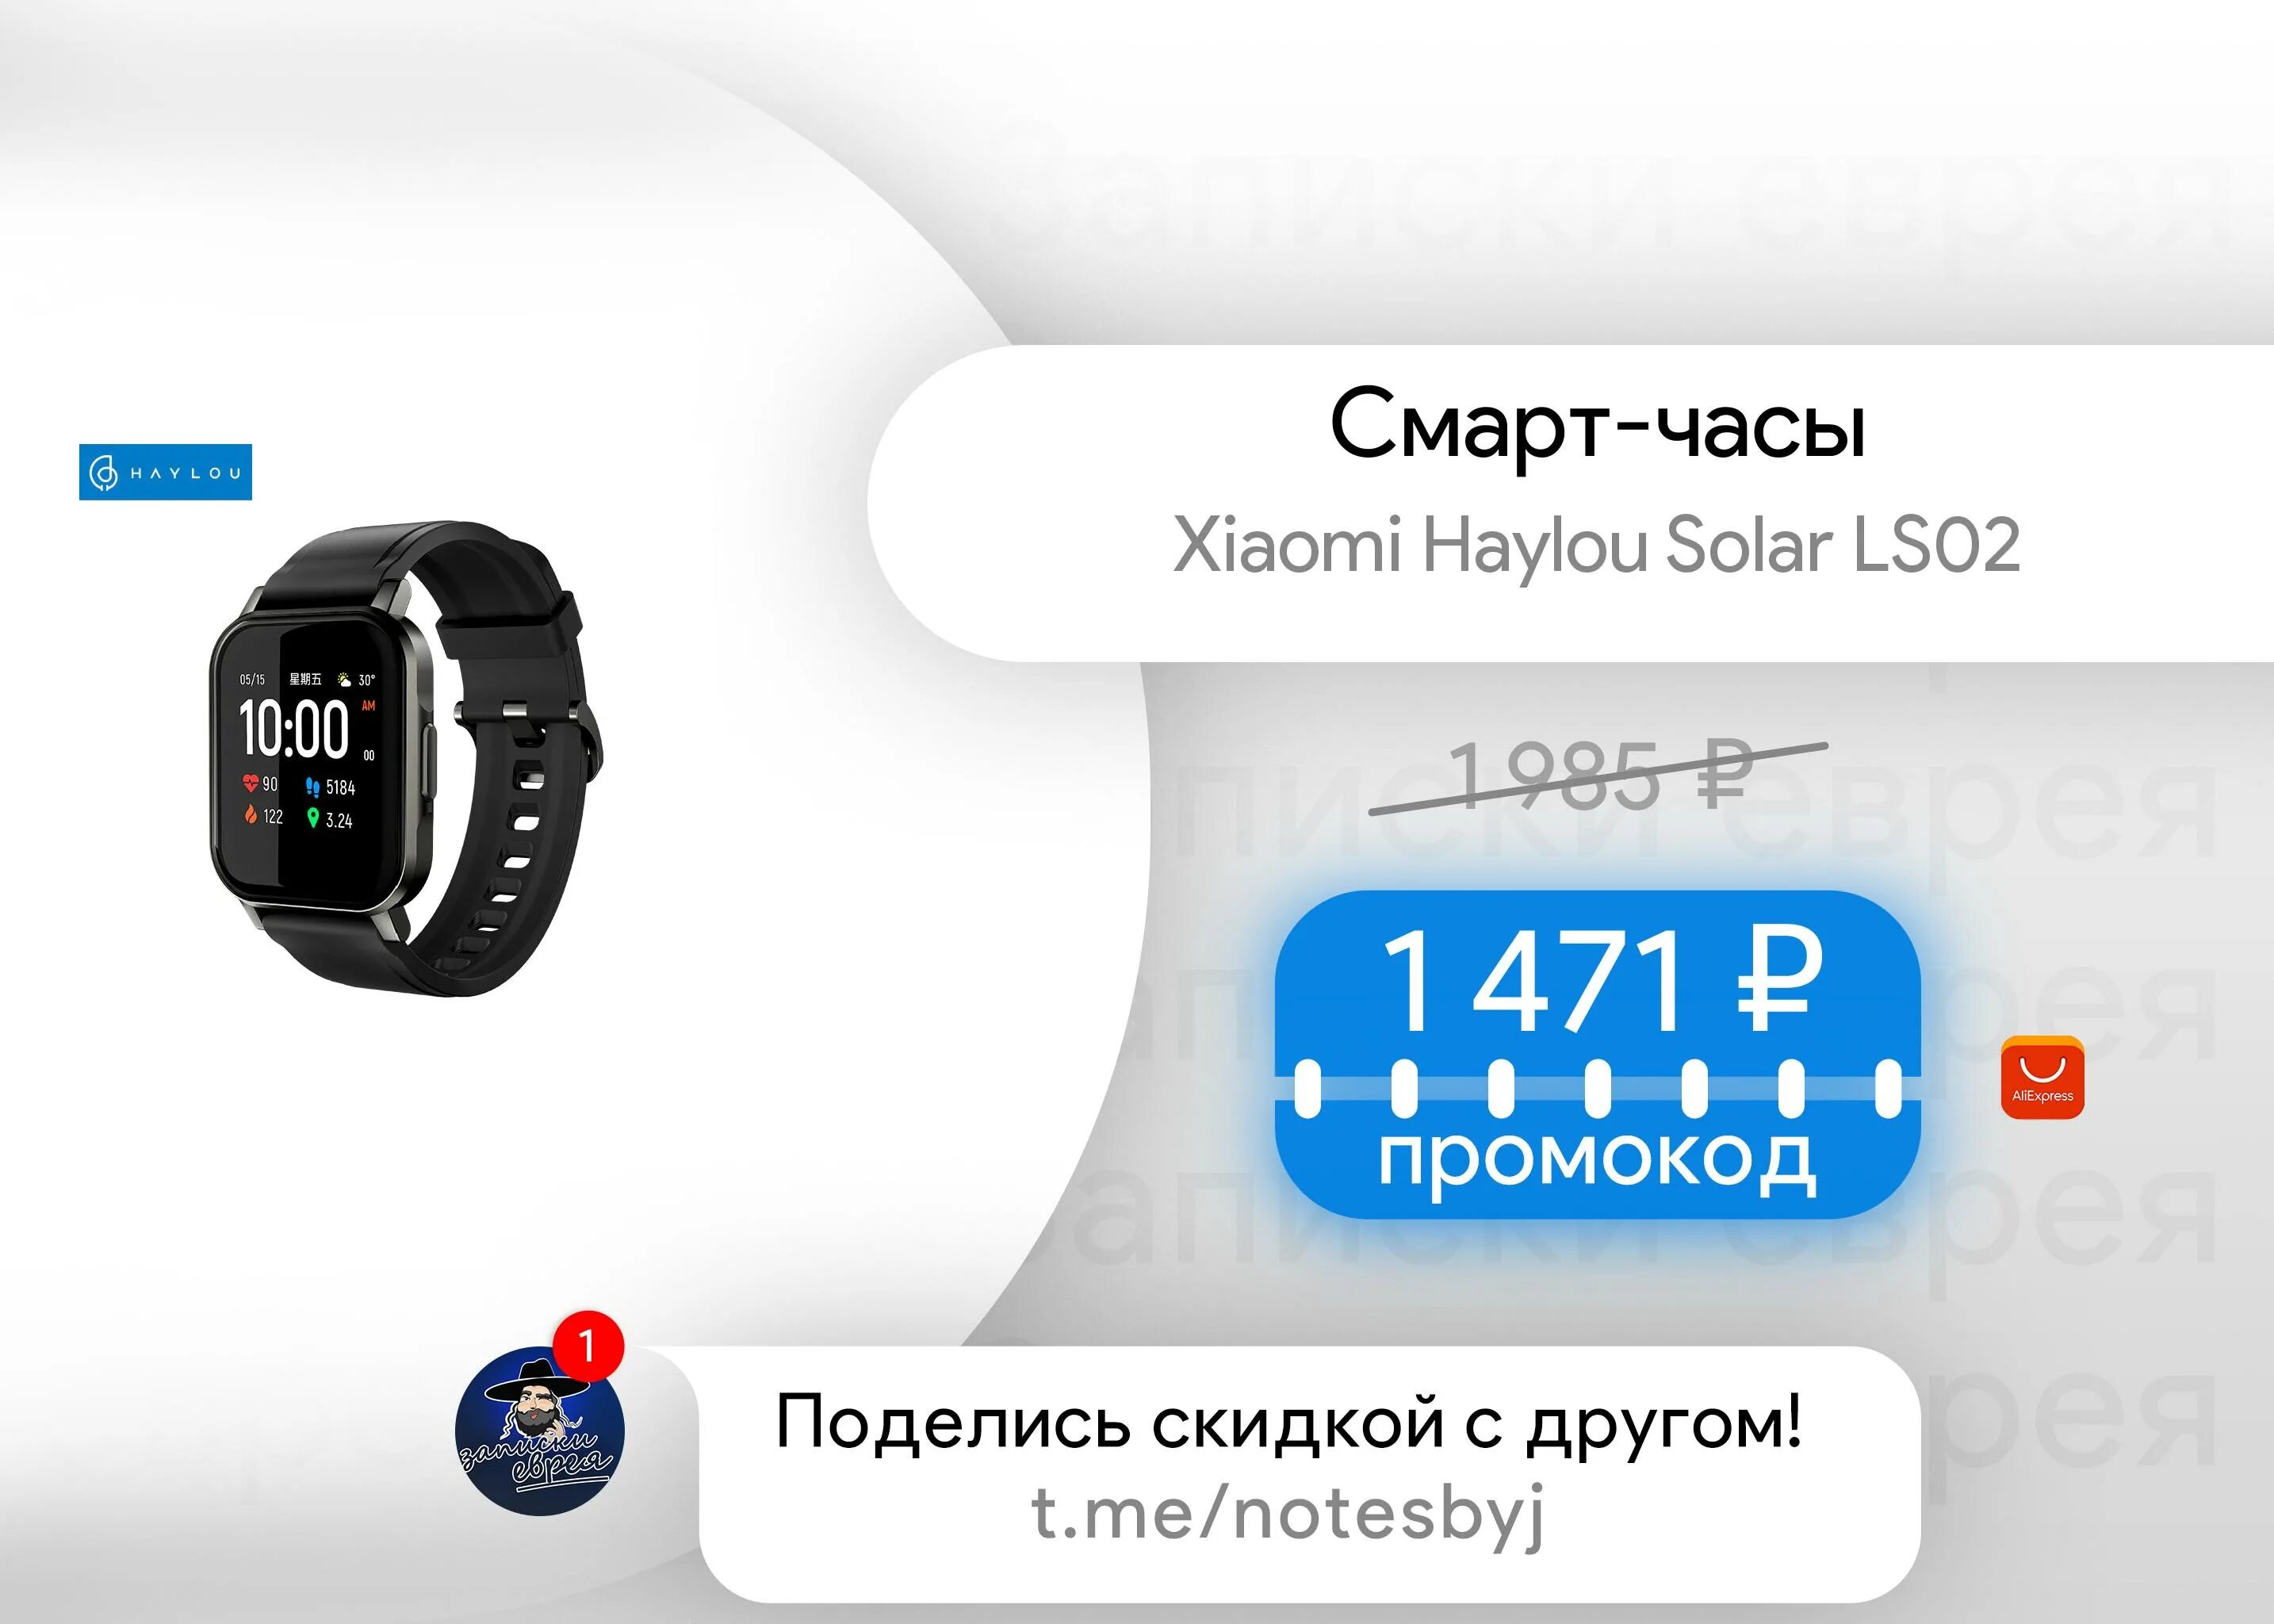 Xiaomi Haylou rt2 (ls10). Haylou умные часы Haylou rt2. Смарт-часы Haylou rt2 ls10 черный. Haylou Smart Band 2.